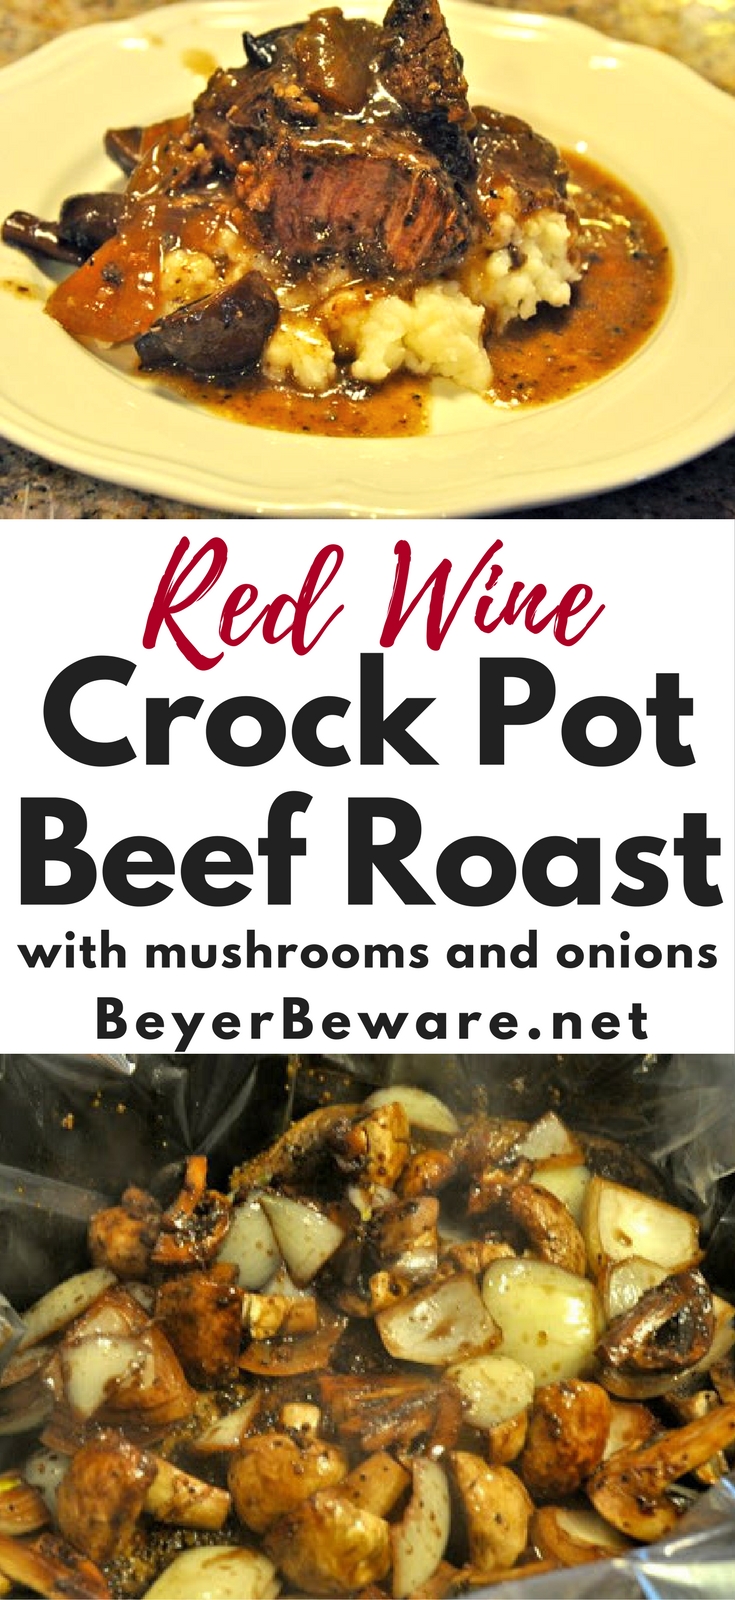 This red wine crock pot beef roast with mushrooms and onions recipe combines great flavors of red wine, and onions for a super tender and juicy beef roast when you get home at the end of the day.